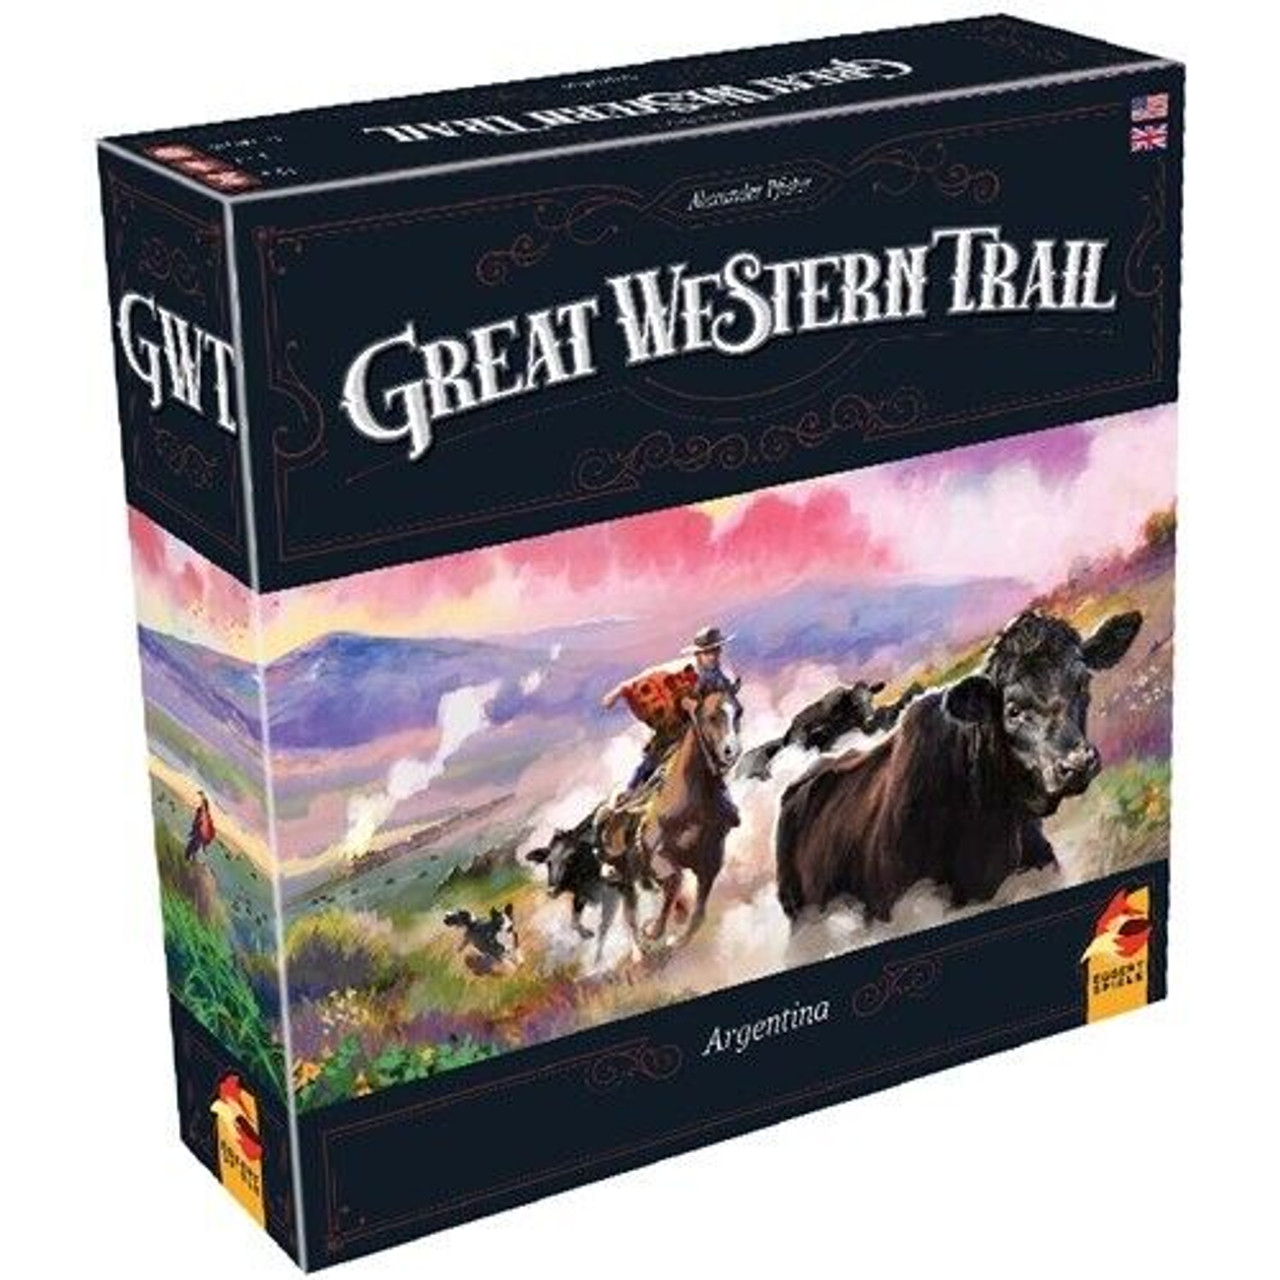 Great Western Trail: Argentina Expansion